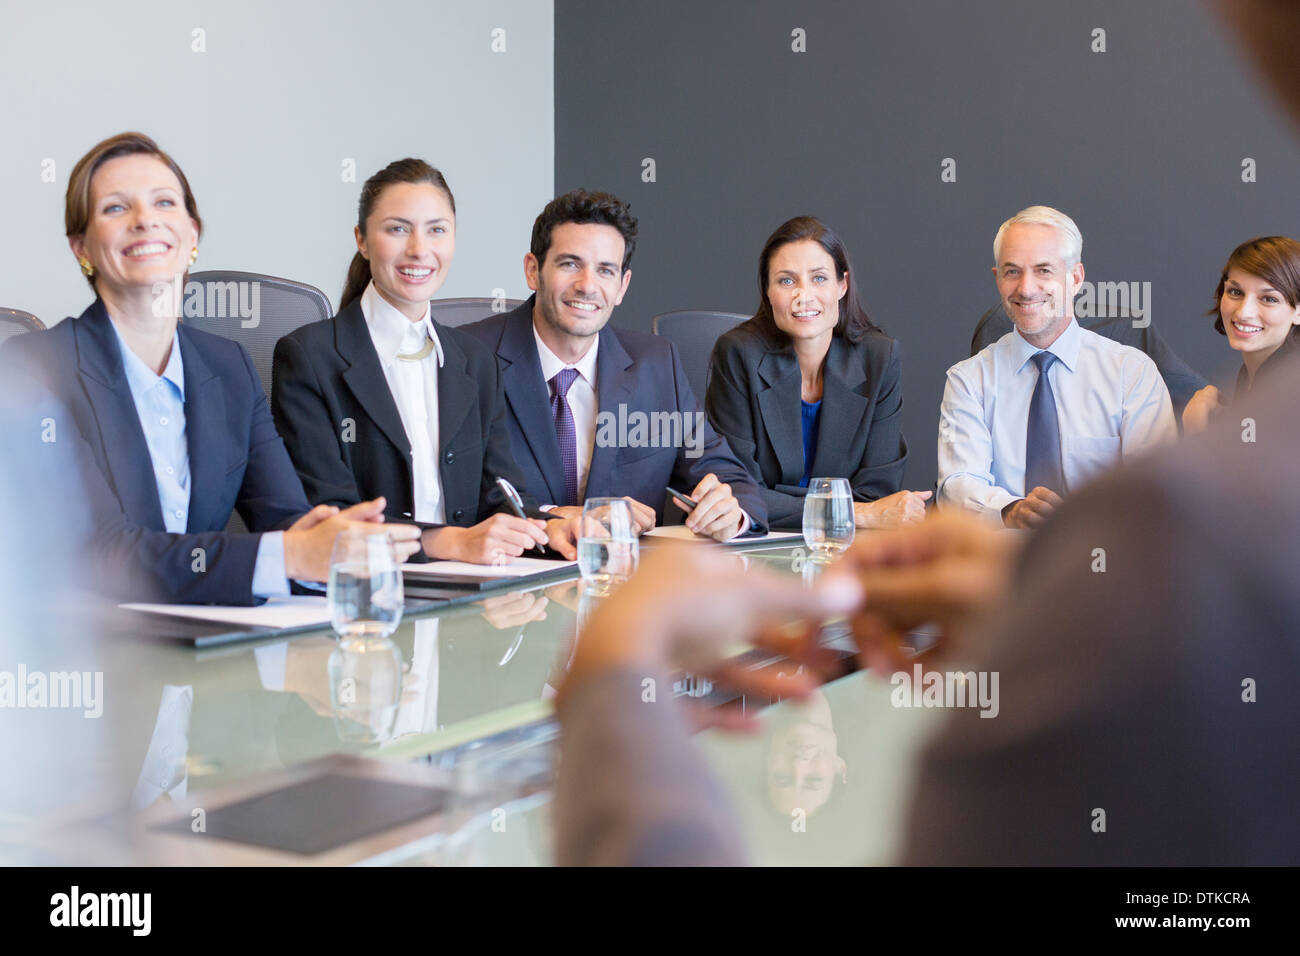 Business people smiling in meeting Banque D'Images